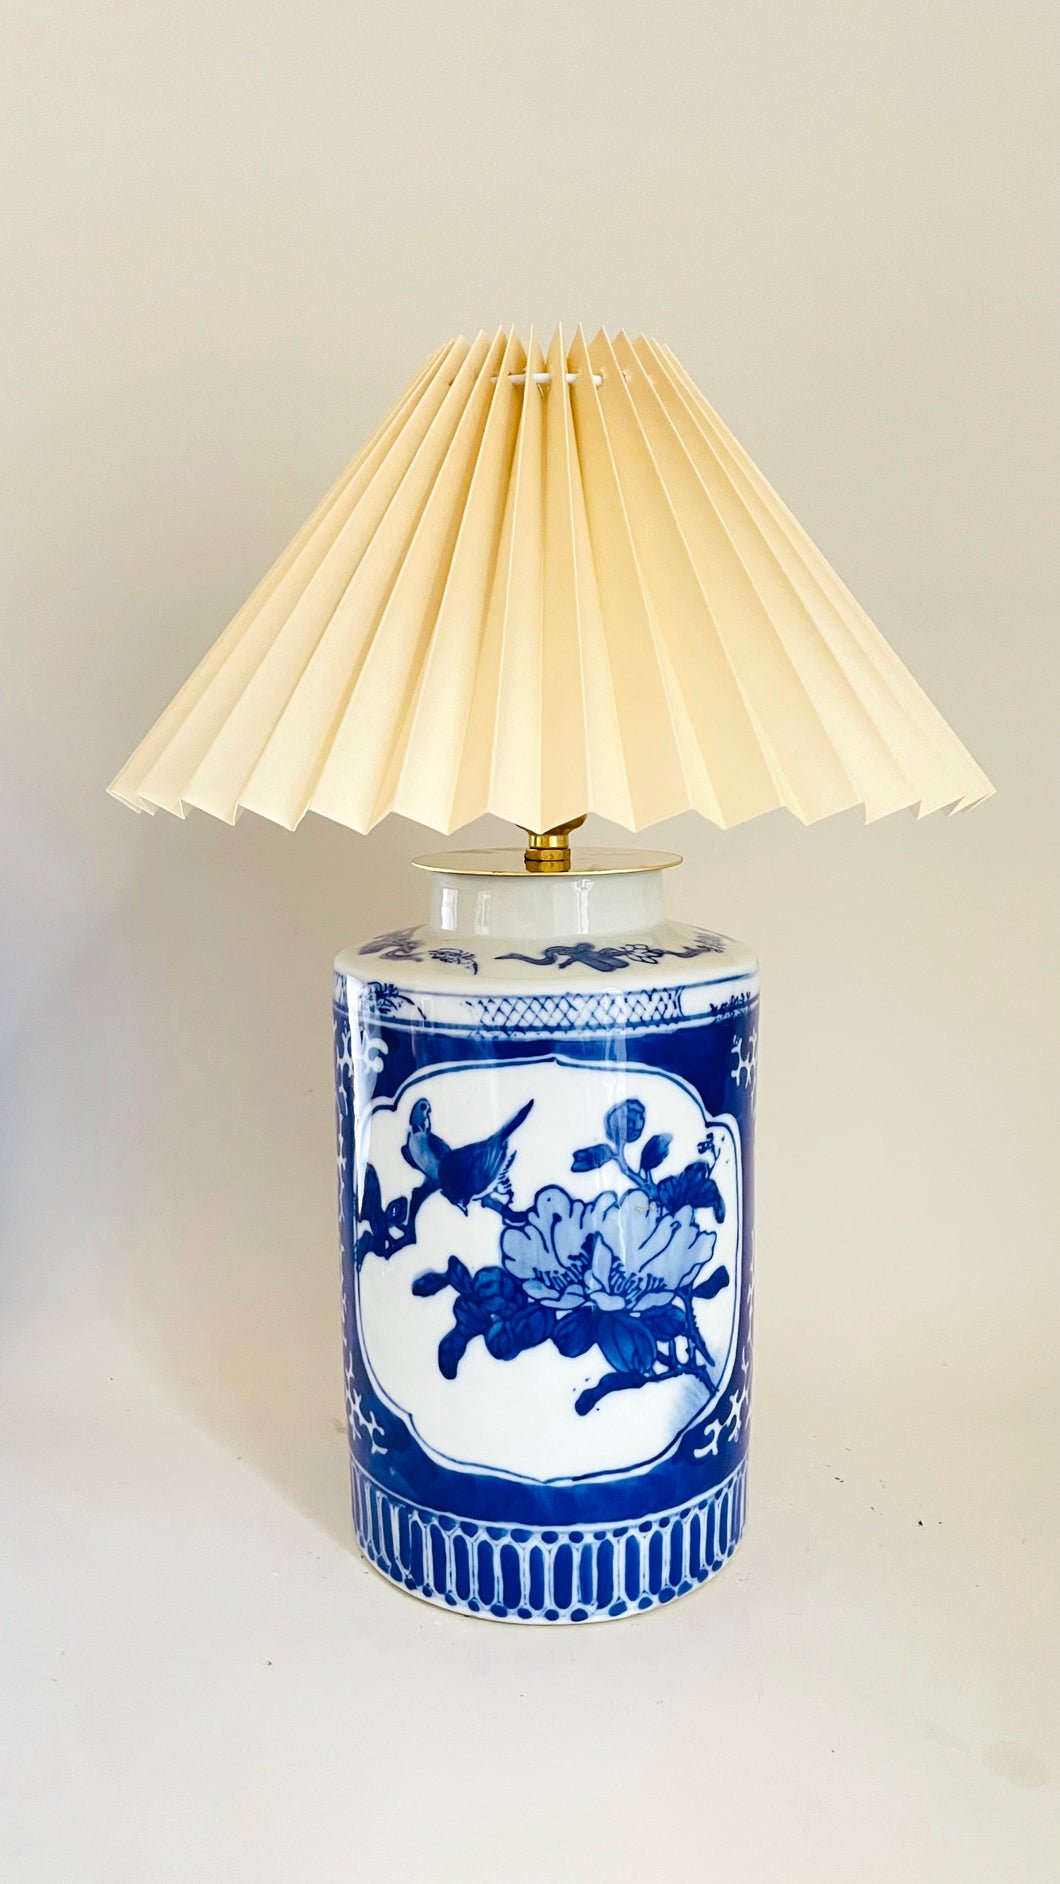 Antique Chinese Table Lamp - pre order for mid March